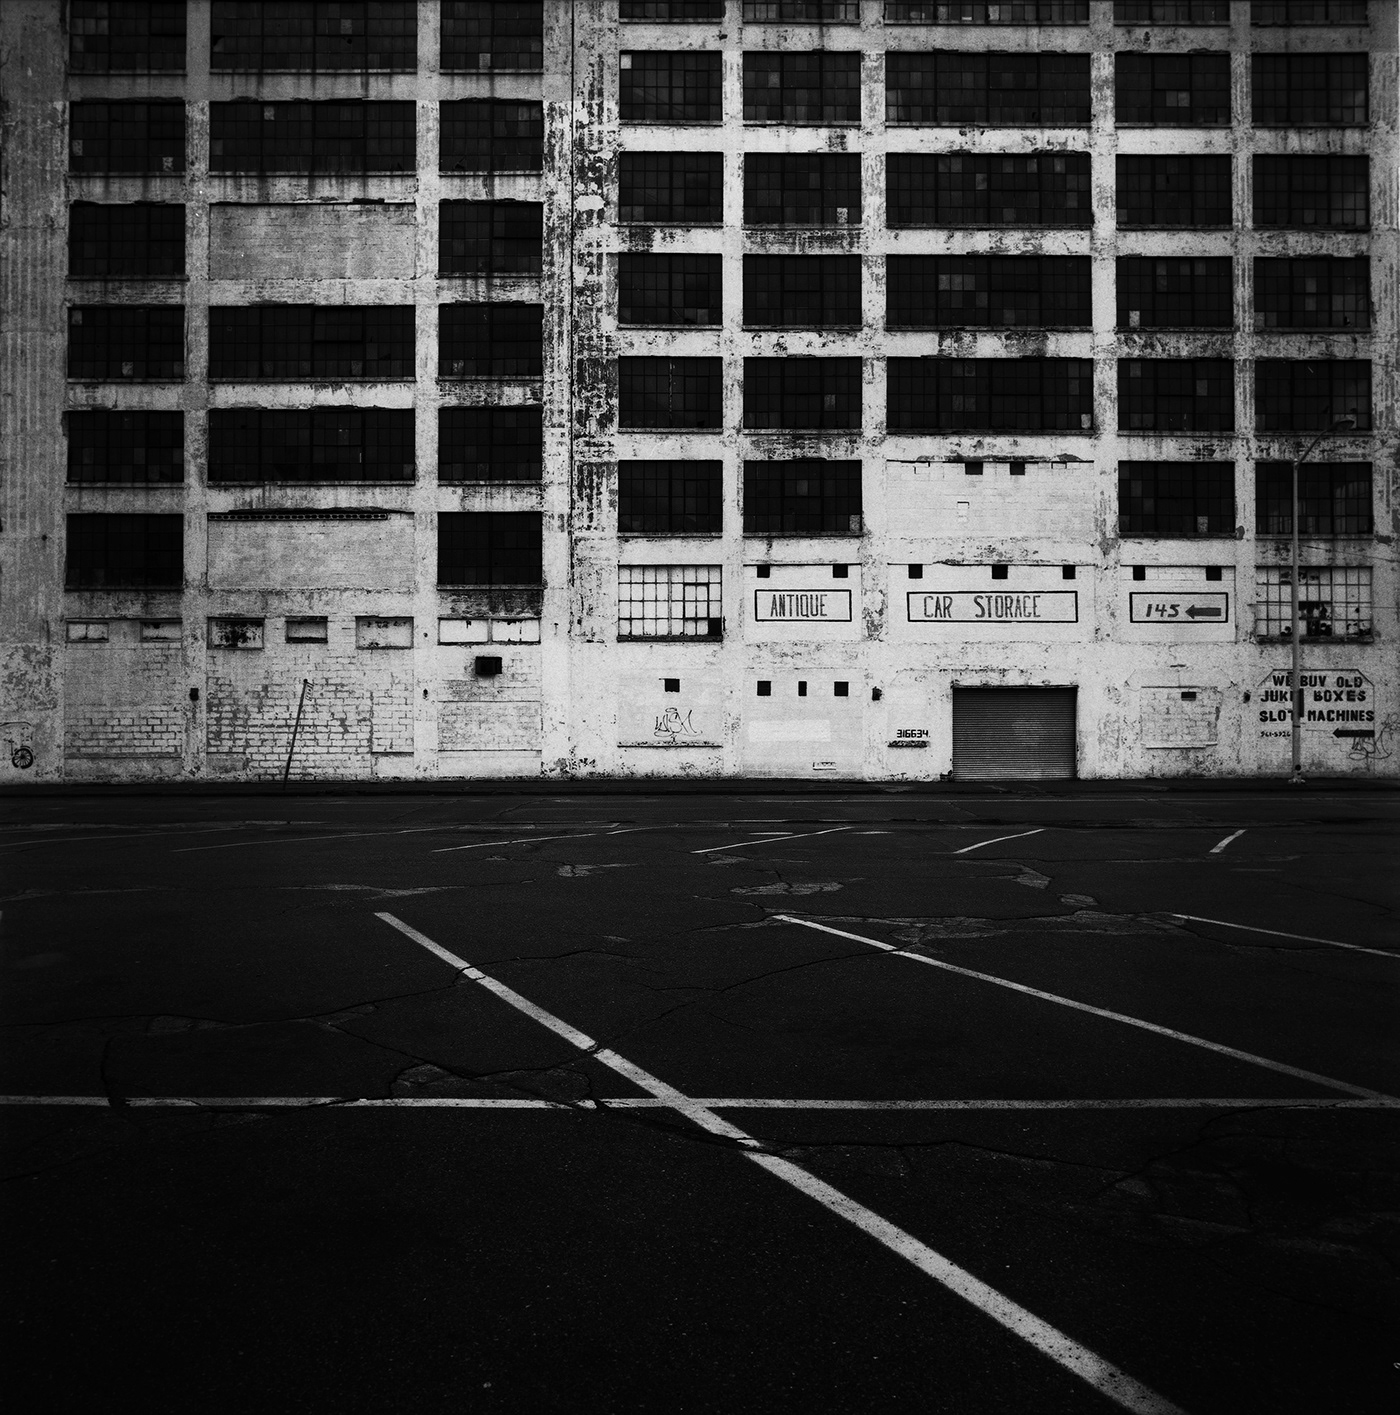 A large warehouse in Detroit, Michigan.